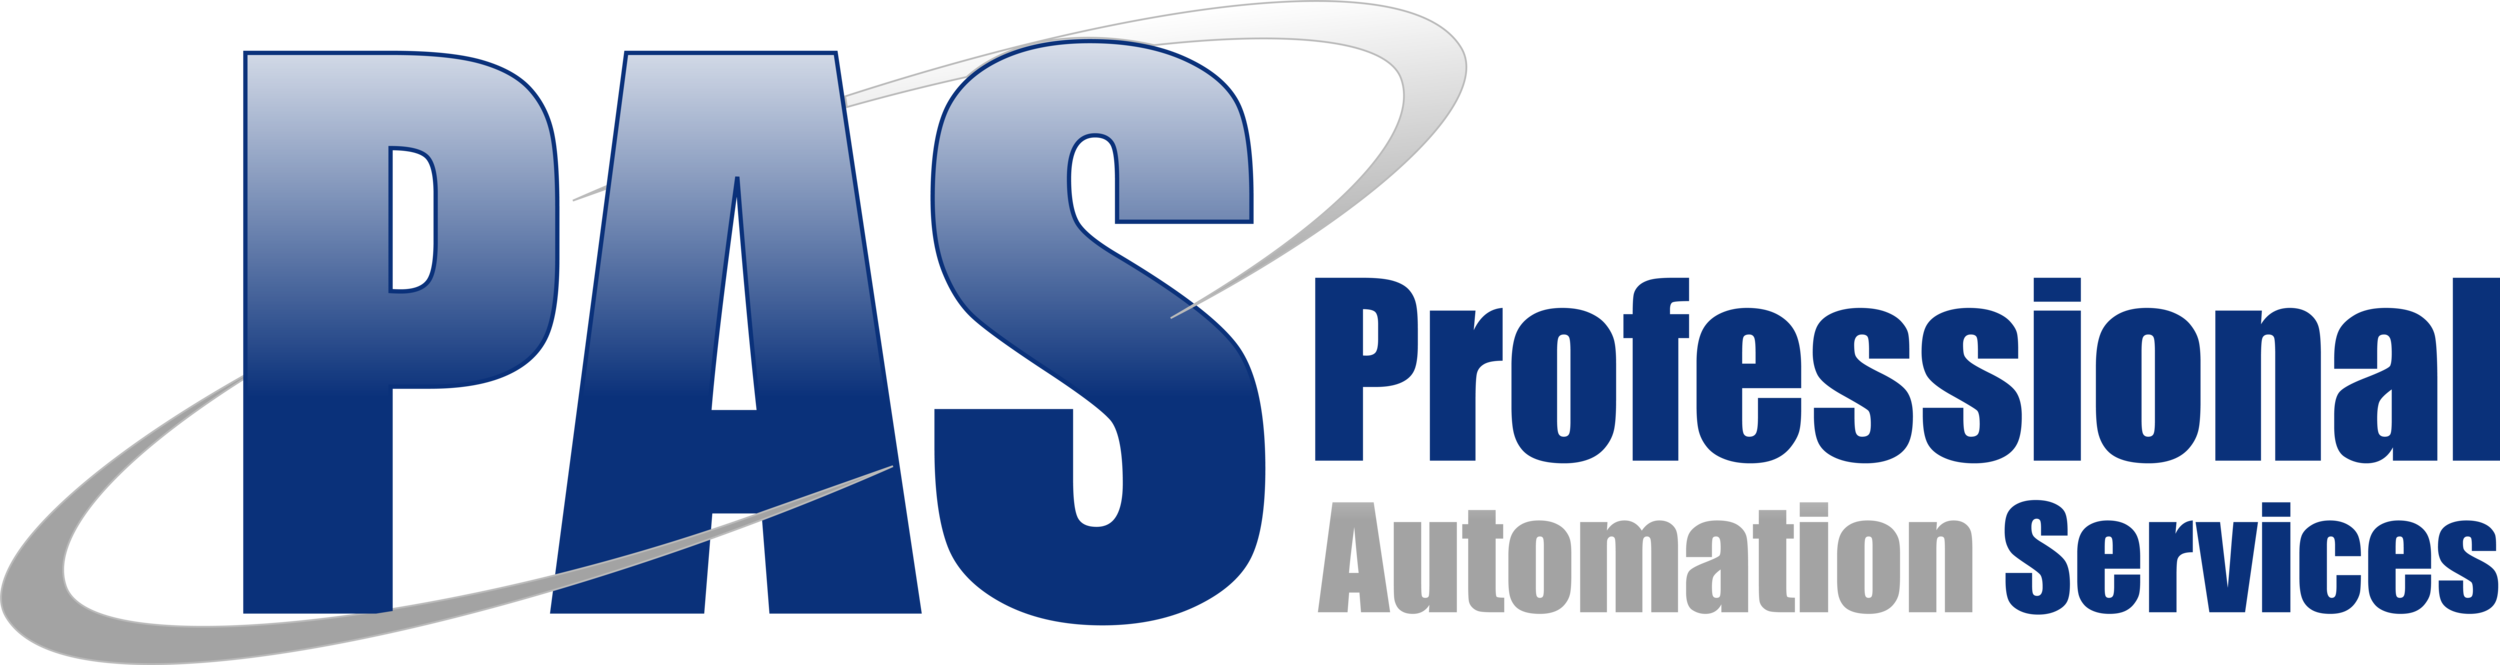 Professional Automation Services